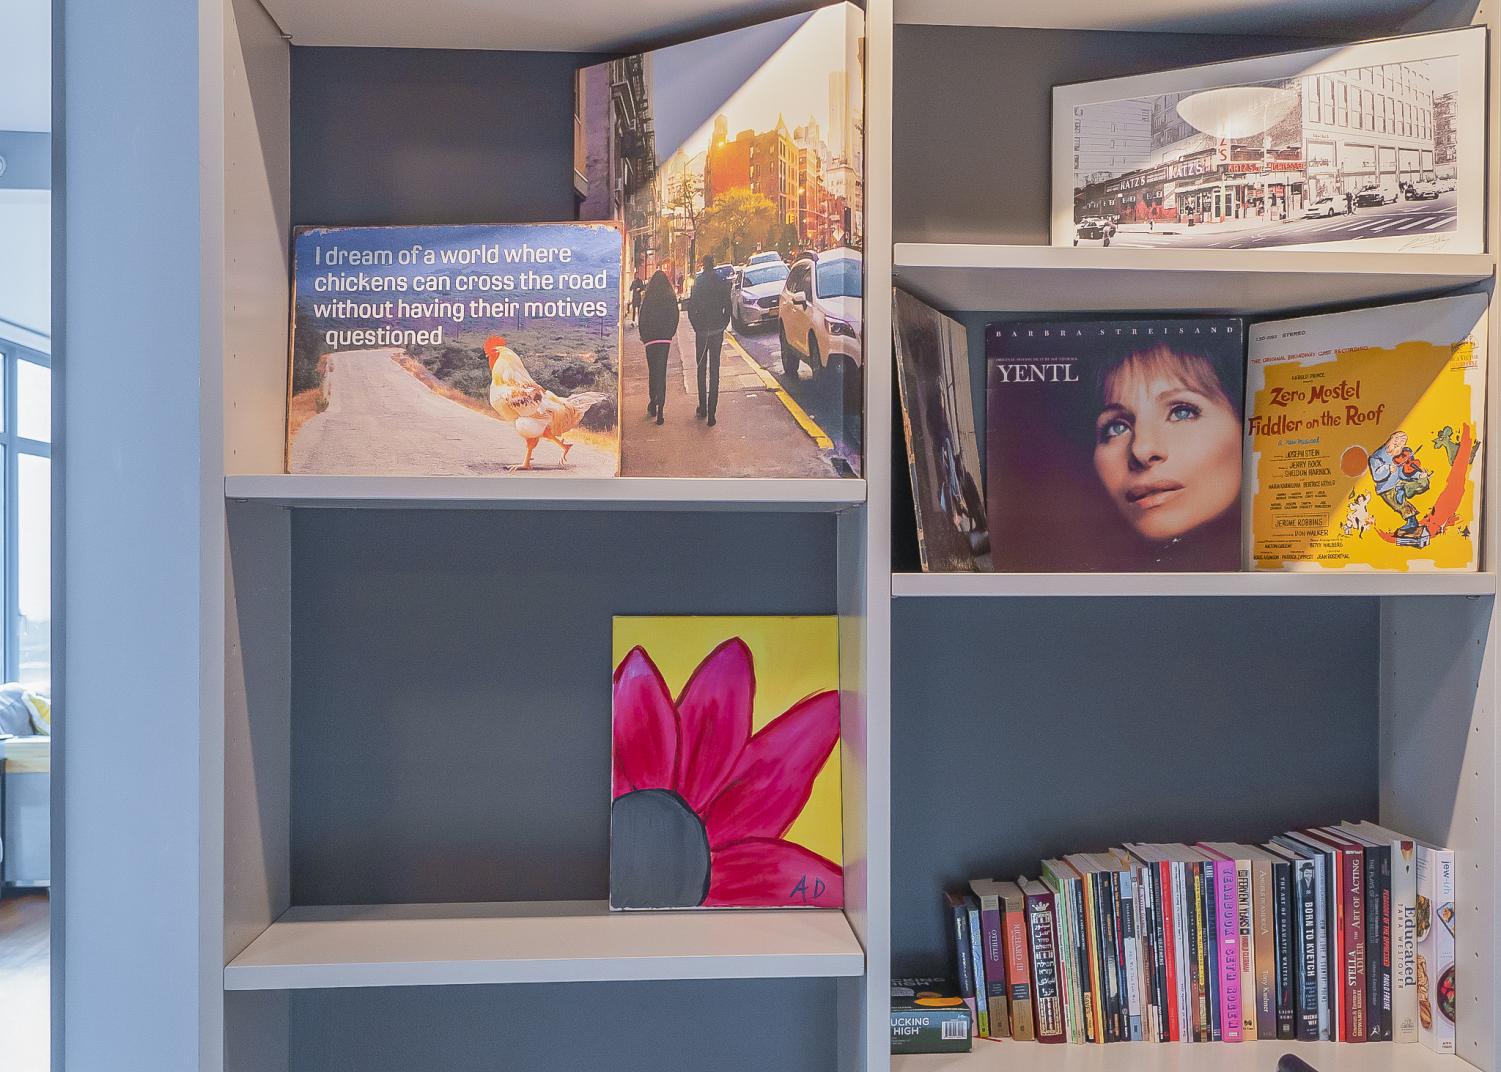 On Adora Dayani’s blue shelves are albums, books and paintings.